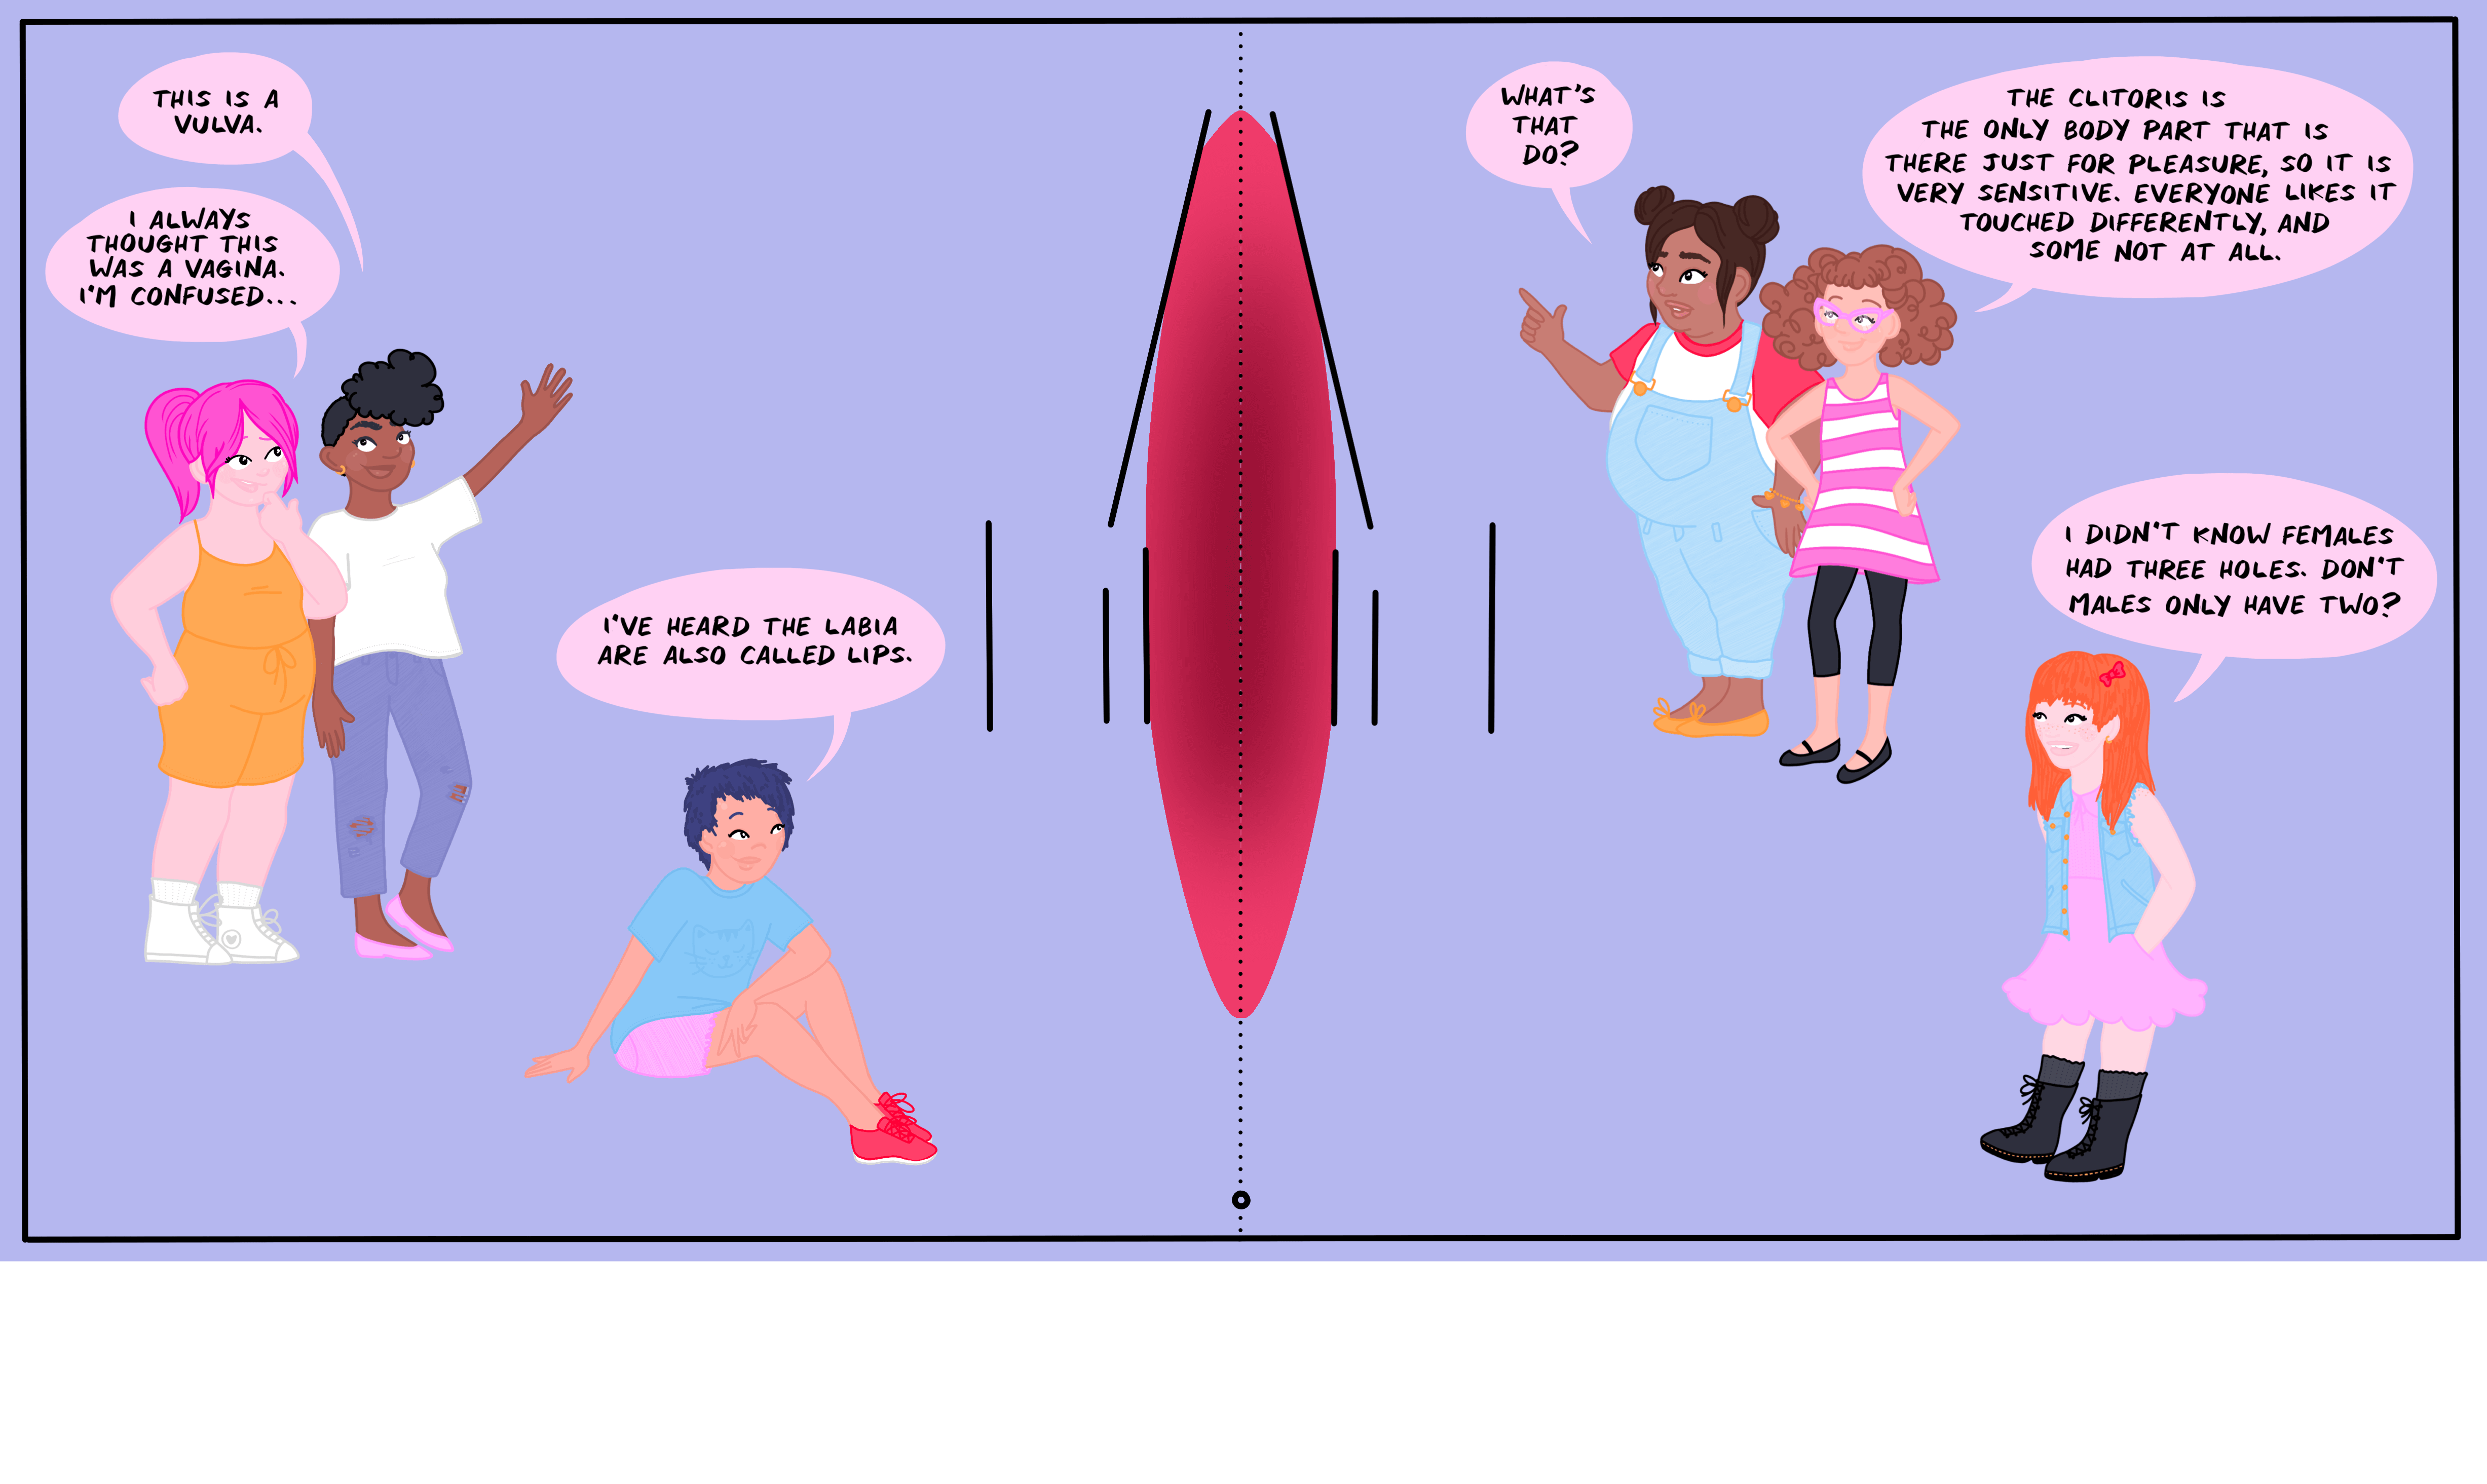 Page from Vaginas and Periods 101 with women discussing genitals